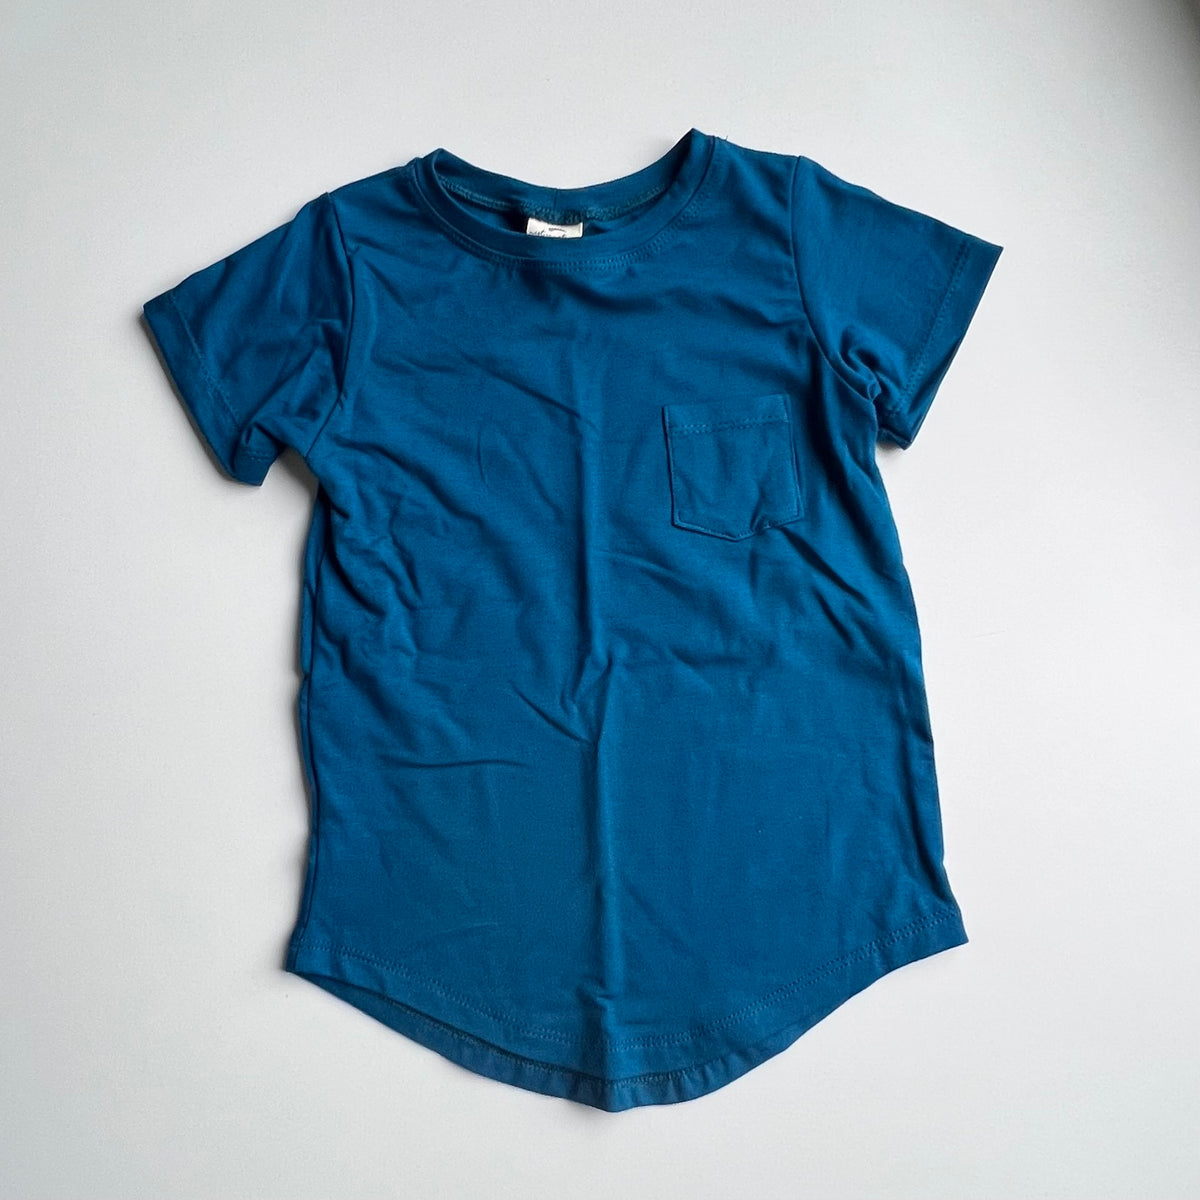 Pocket Tee in 'Cerulean' - Ready to Ship